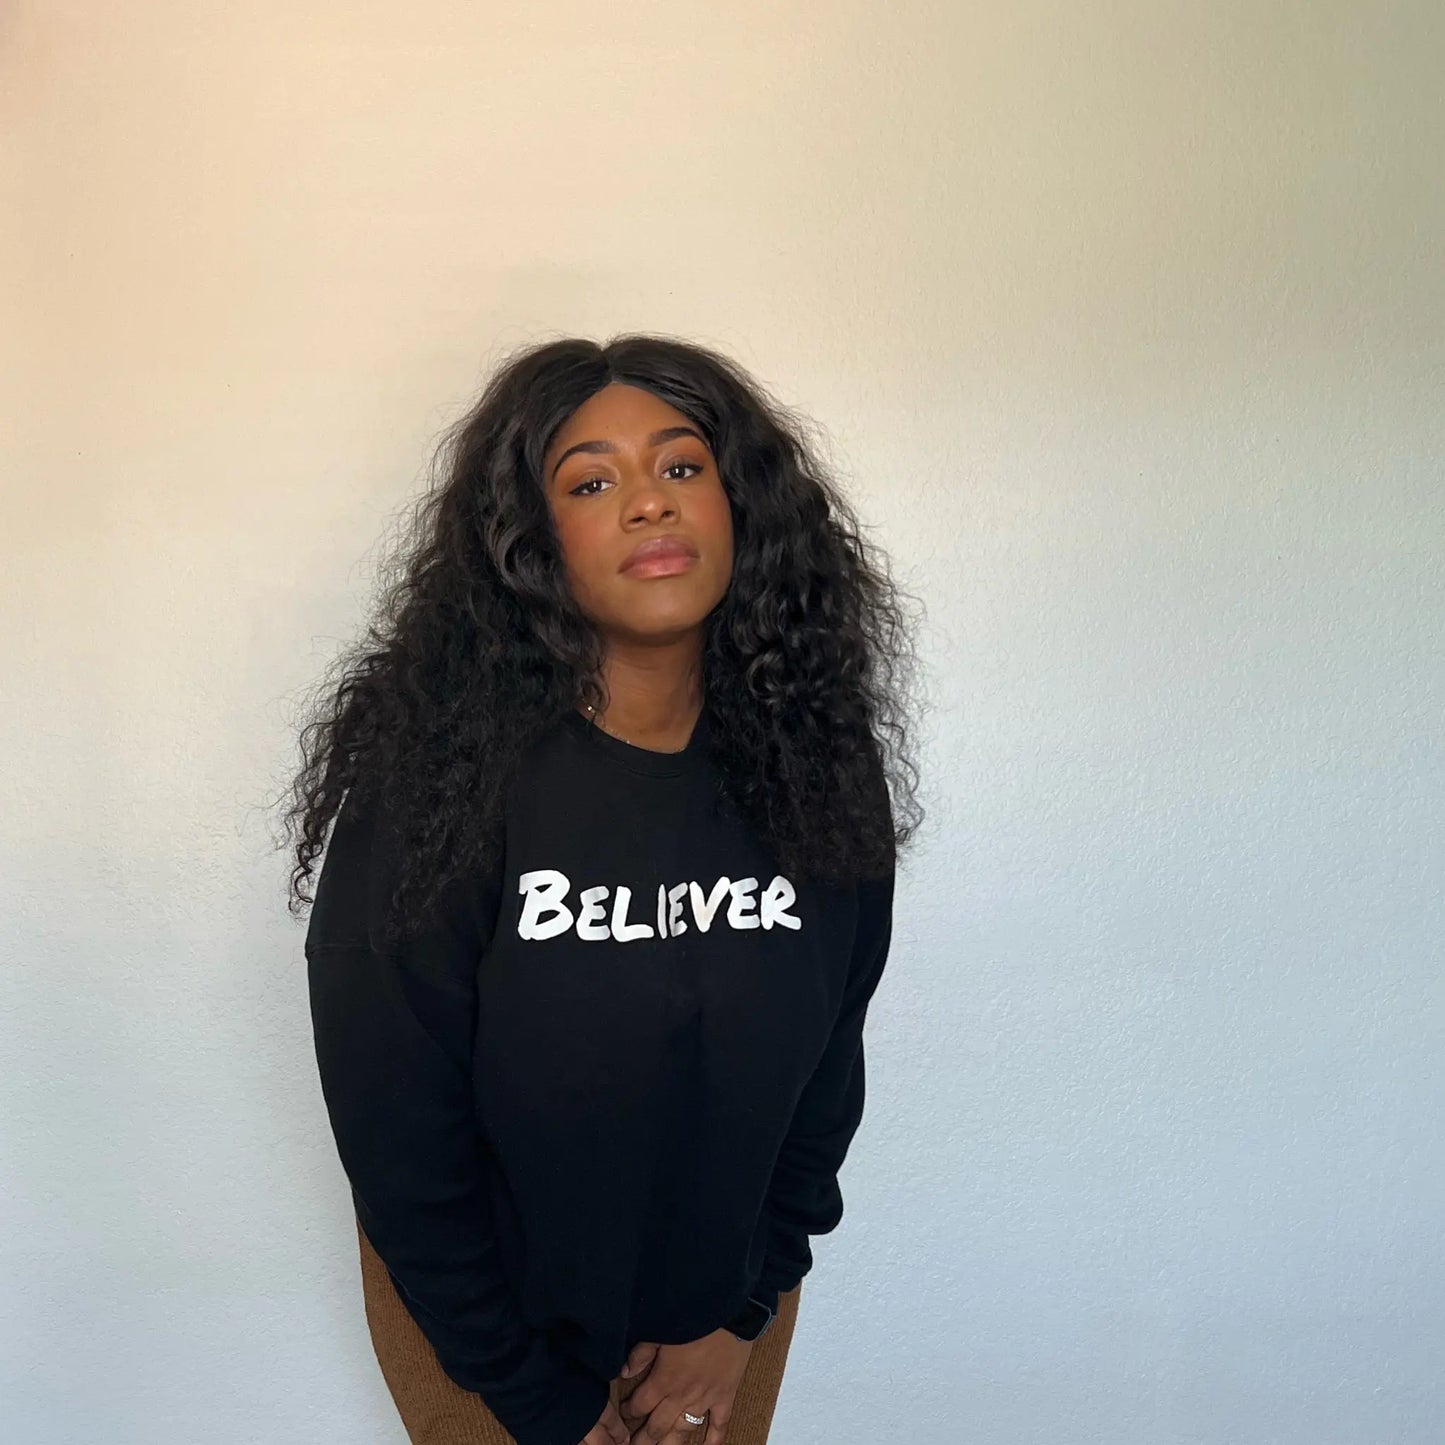 This Sweeatshirt is all black with a crew neck style. The words Believer are pressed on the shirt in bold white letters. Believer is written across the chest, stretching from sholder to shoulder. The sweatshirt this comftorable and fitted. Size up for an oversized look. Edit alt text. On a Nuetral Colored back ground. The back reads John 3:16 on the tail of the sweatshirt. 